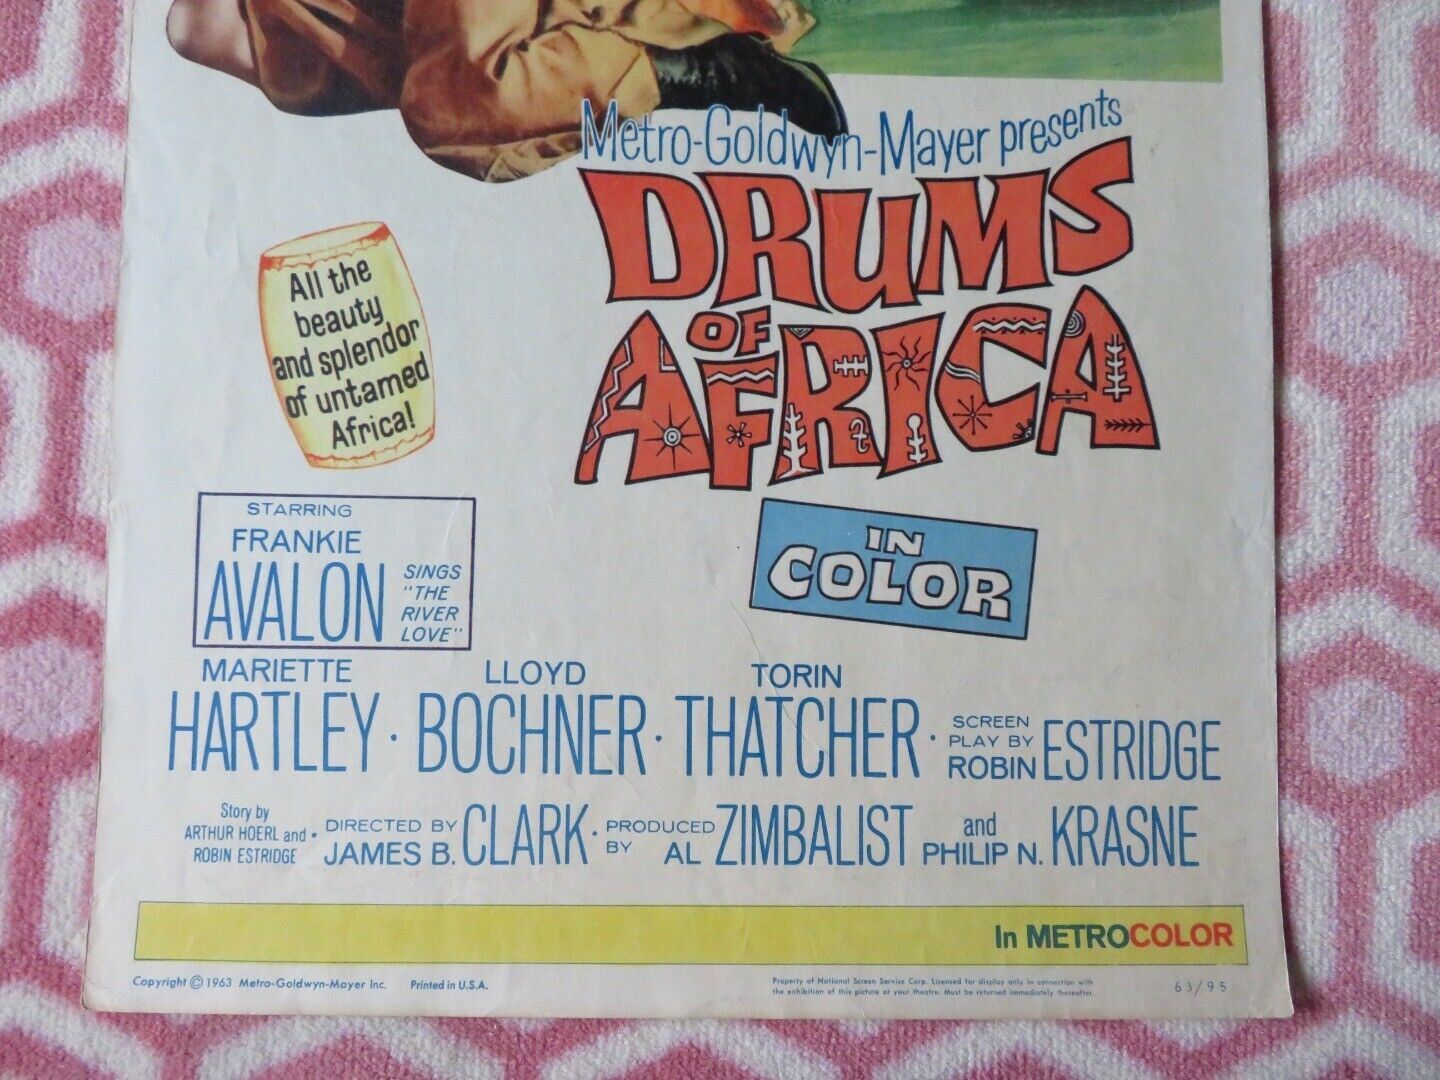 DRUMS OF AFRICA  US INSERT (14"x 36") POSTER FRANKIE AVALON 1963